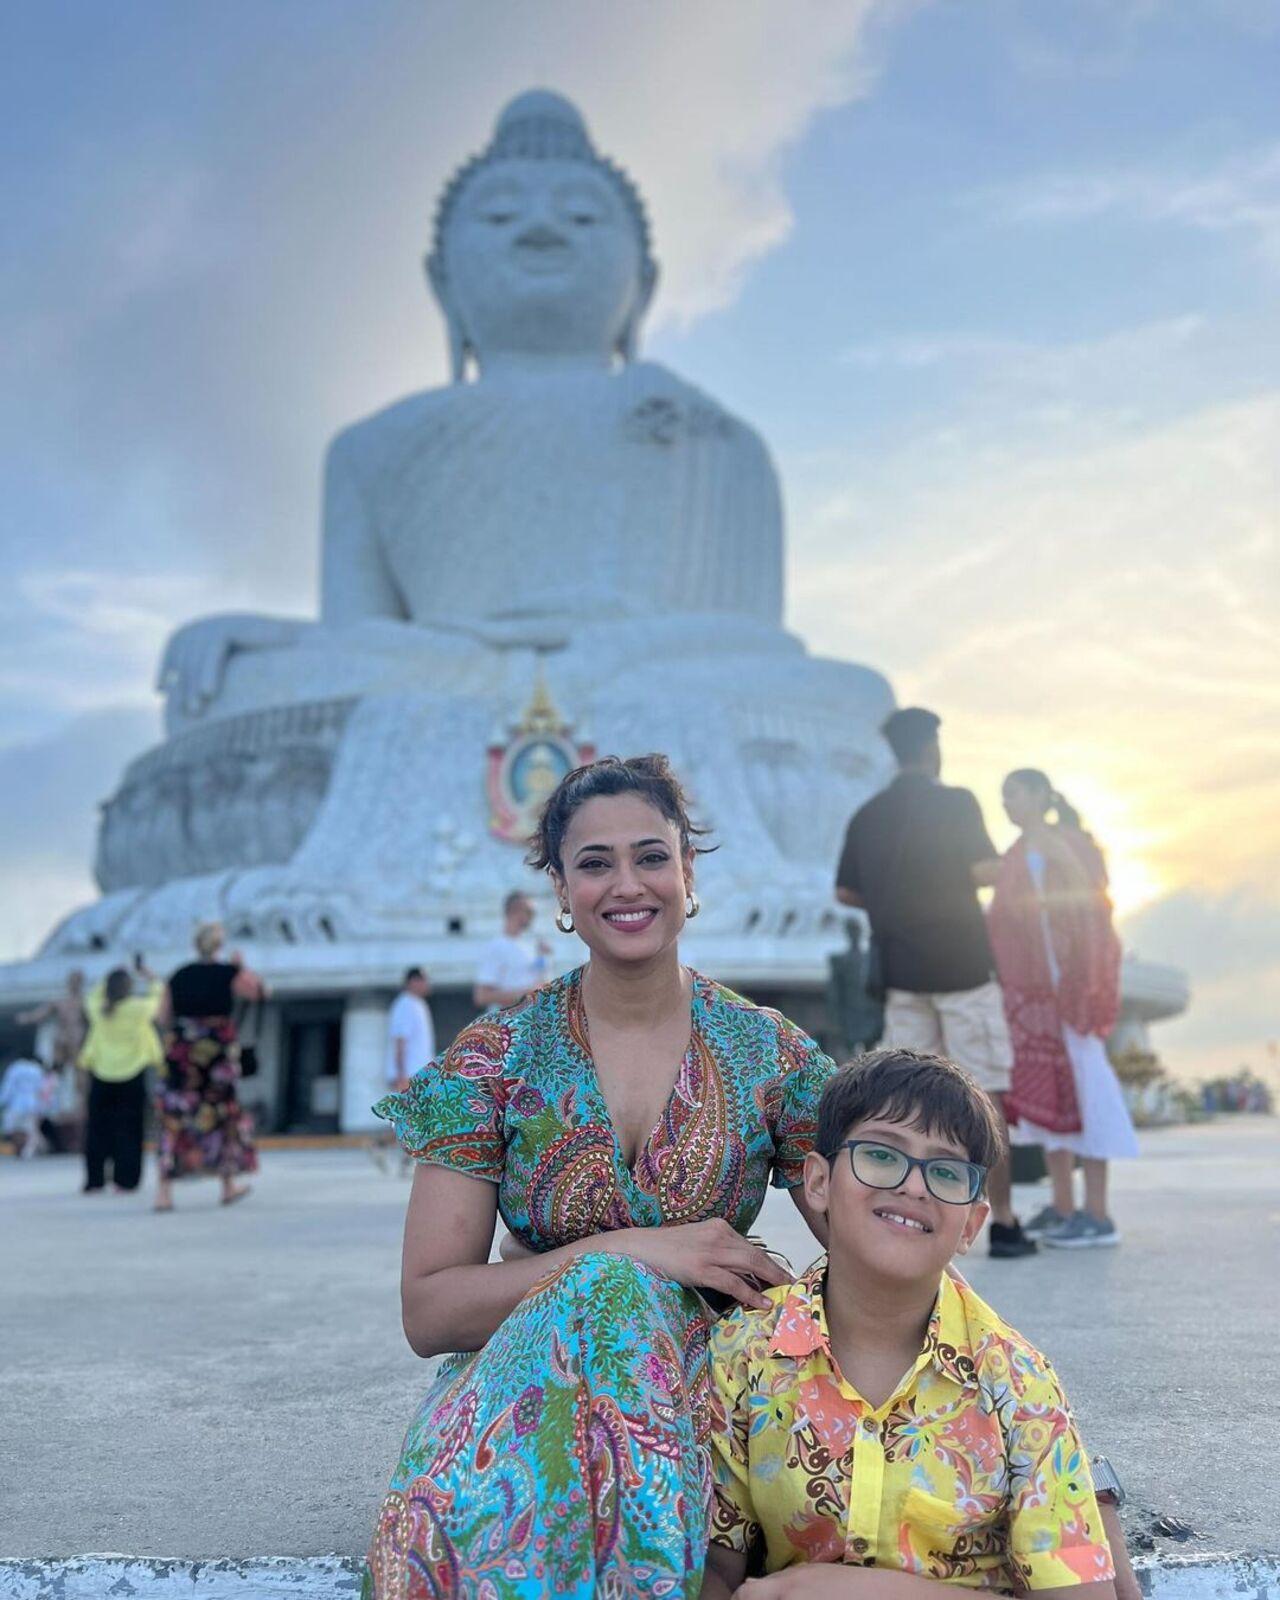 Shweta also posed with her son Reyansh before The Great Buddha of Phuket.